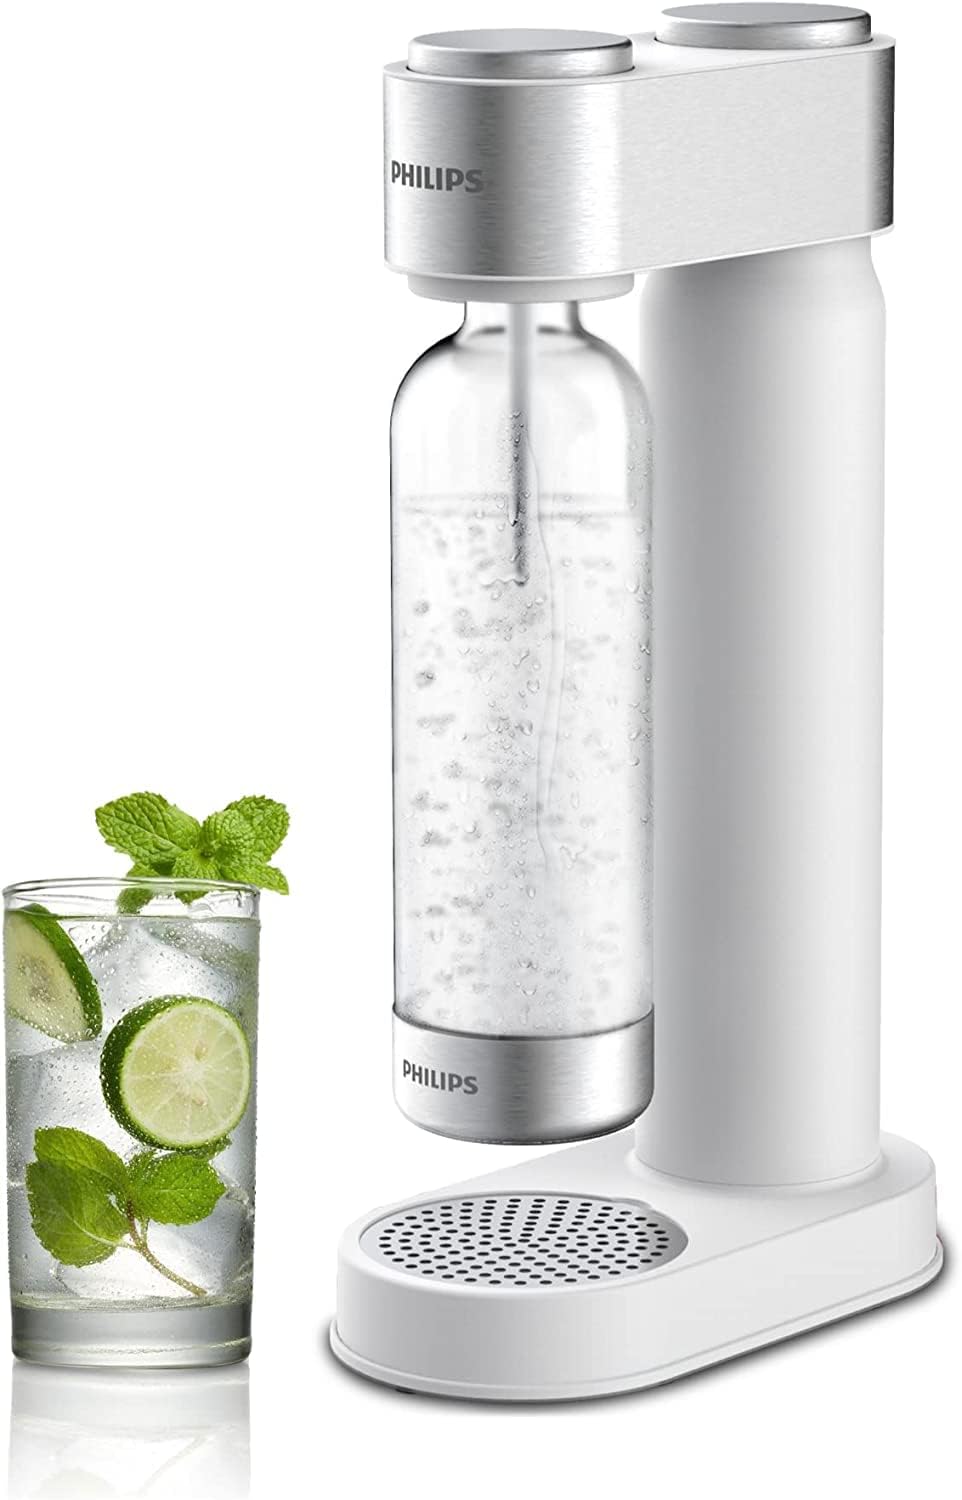 Review of Philips Stainless Sparkling Water Maker Soda Maker Machine